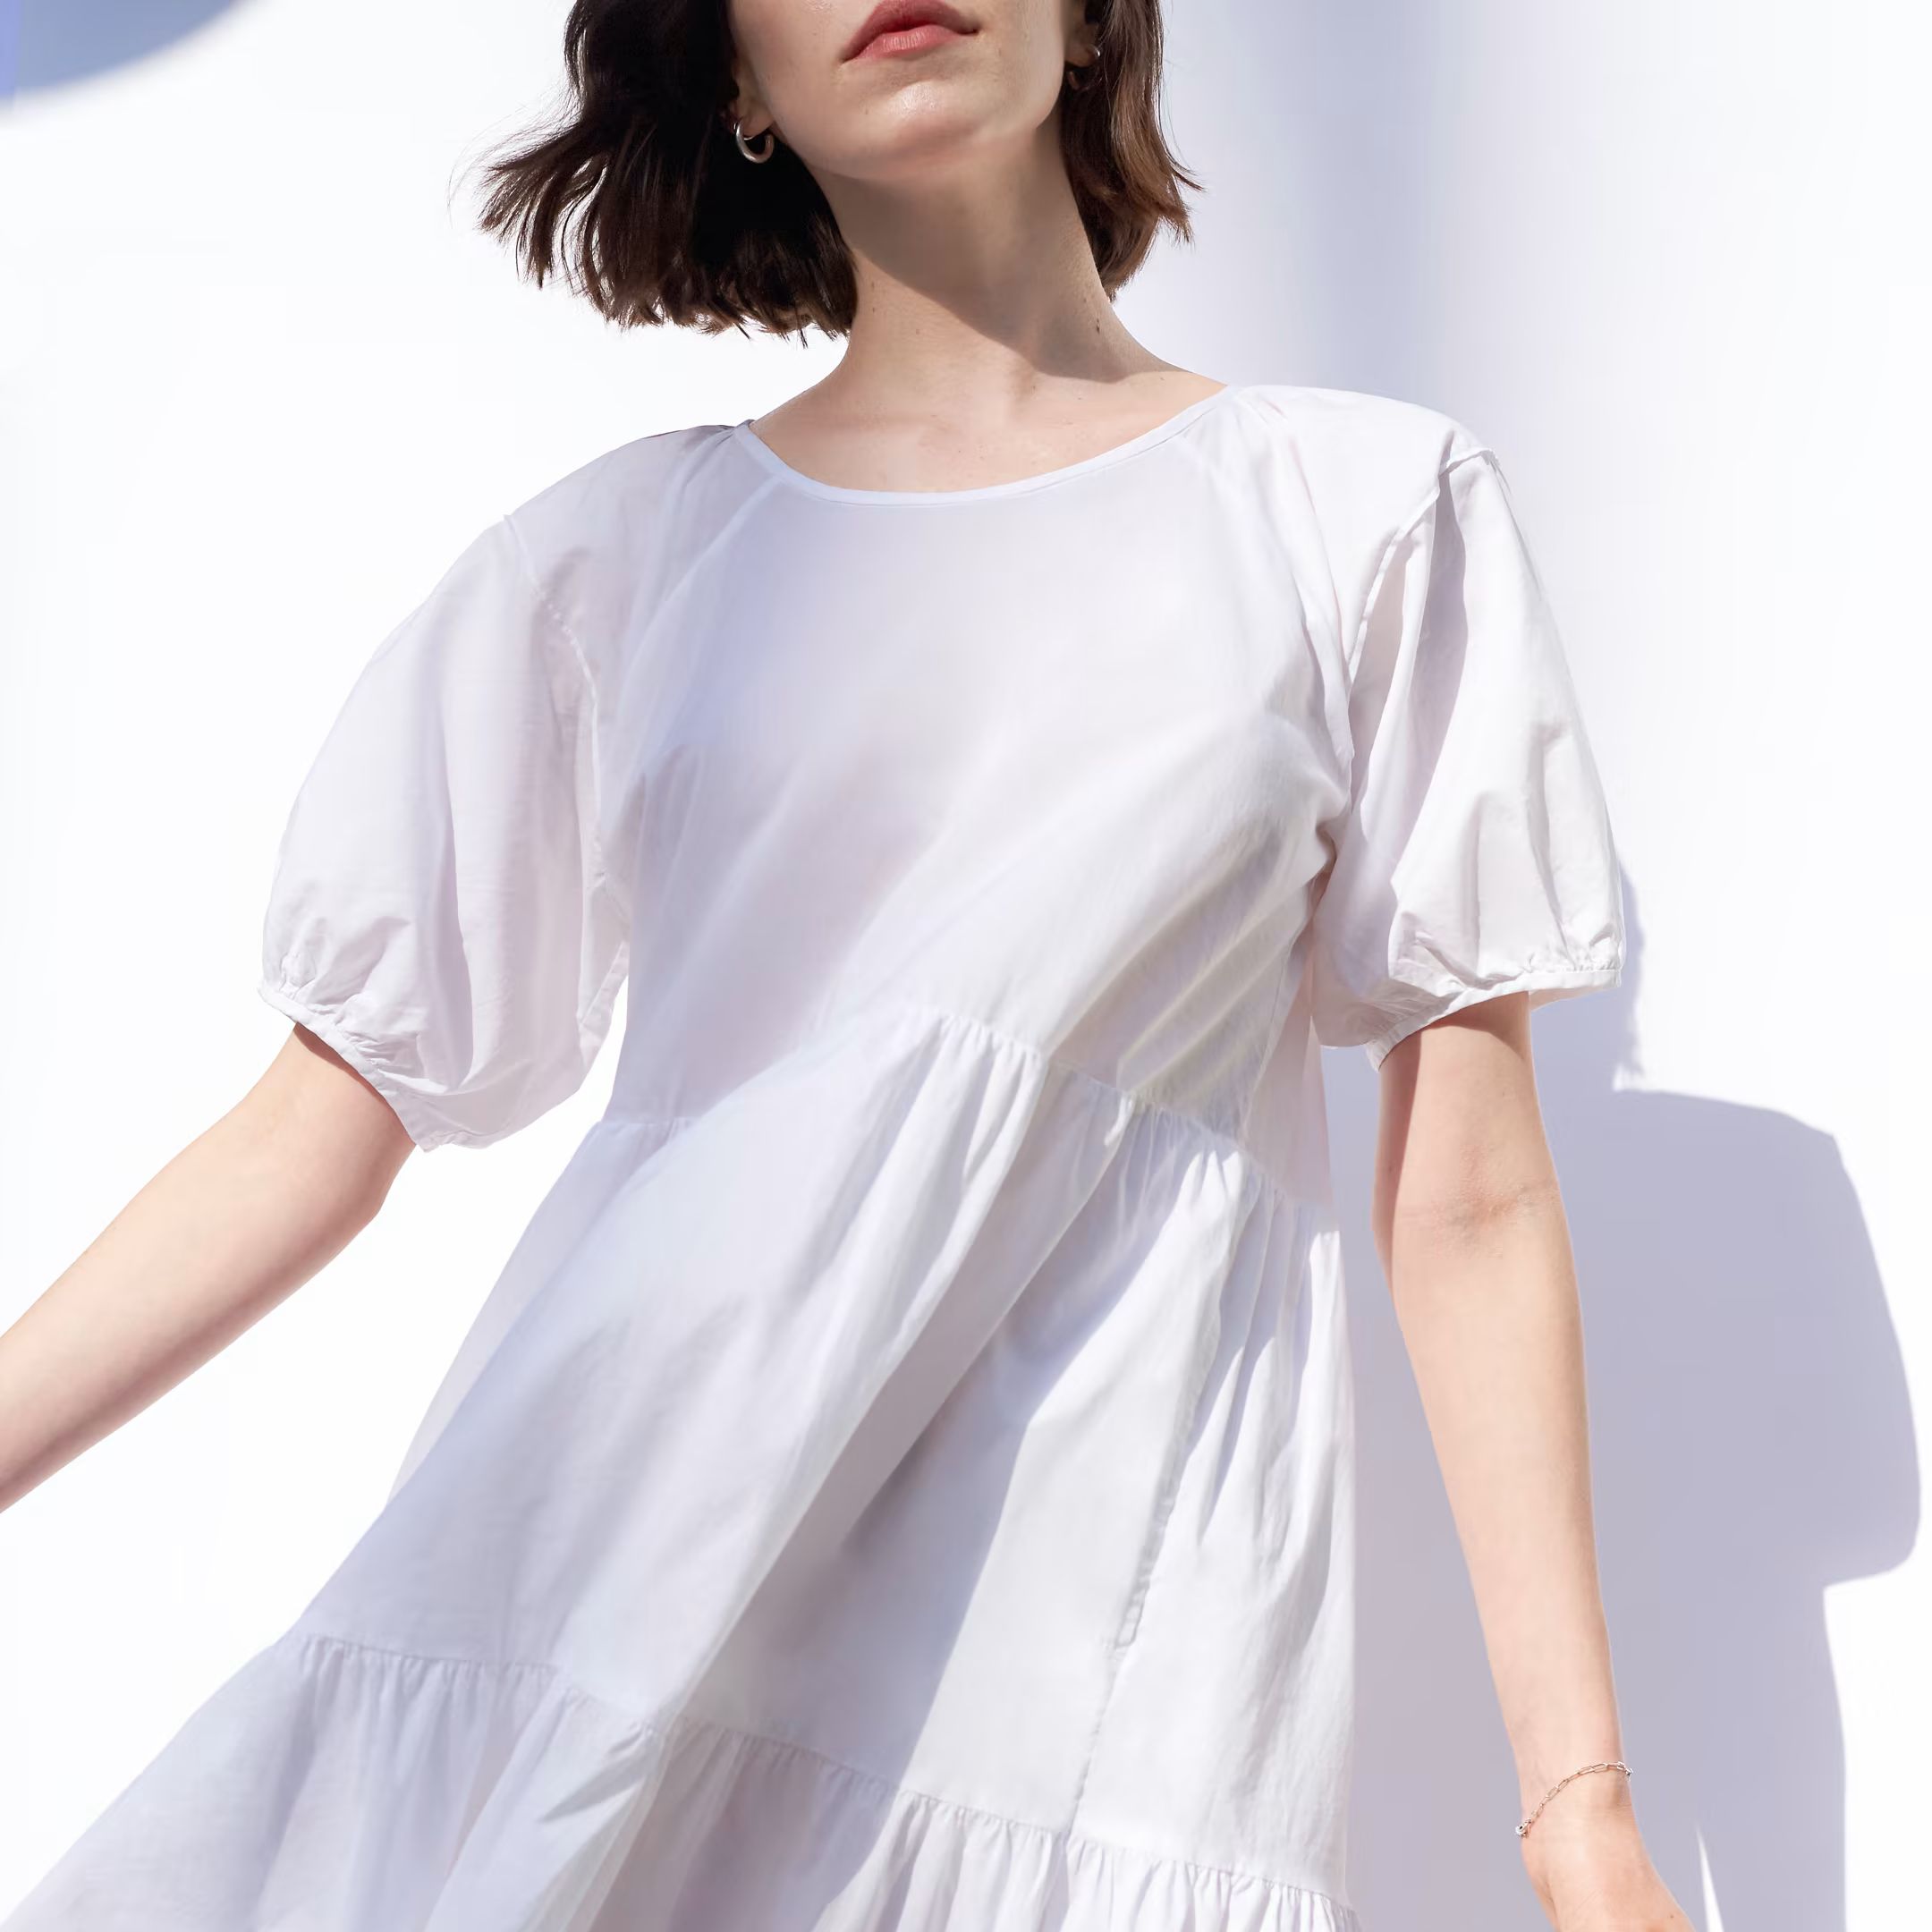 The Tiered Cotton Dress | Everlane